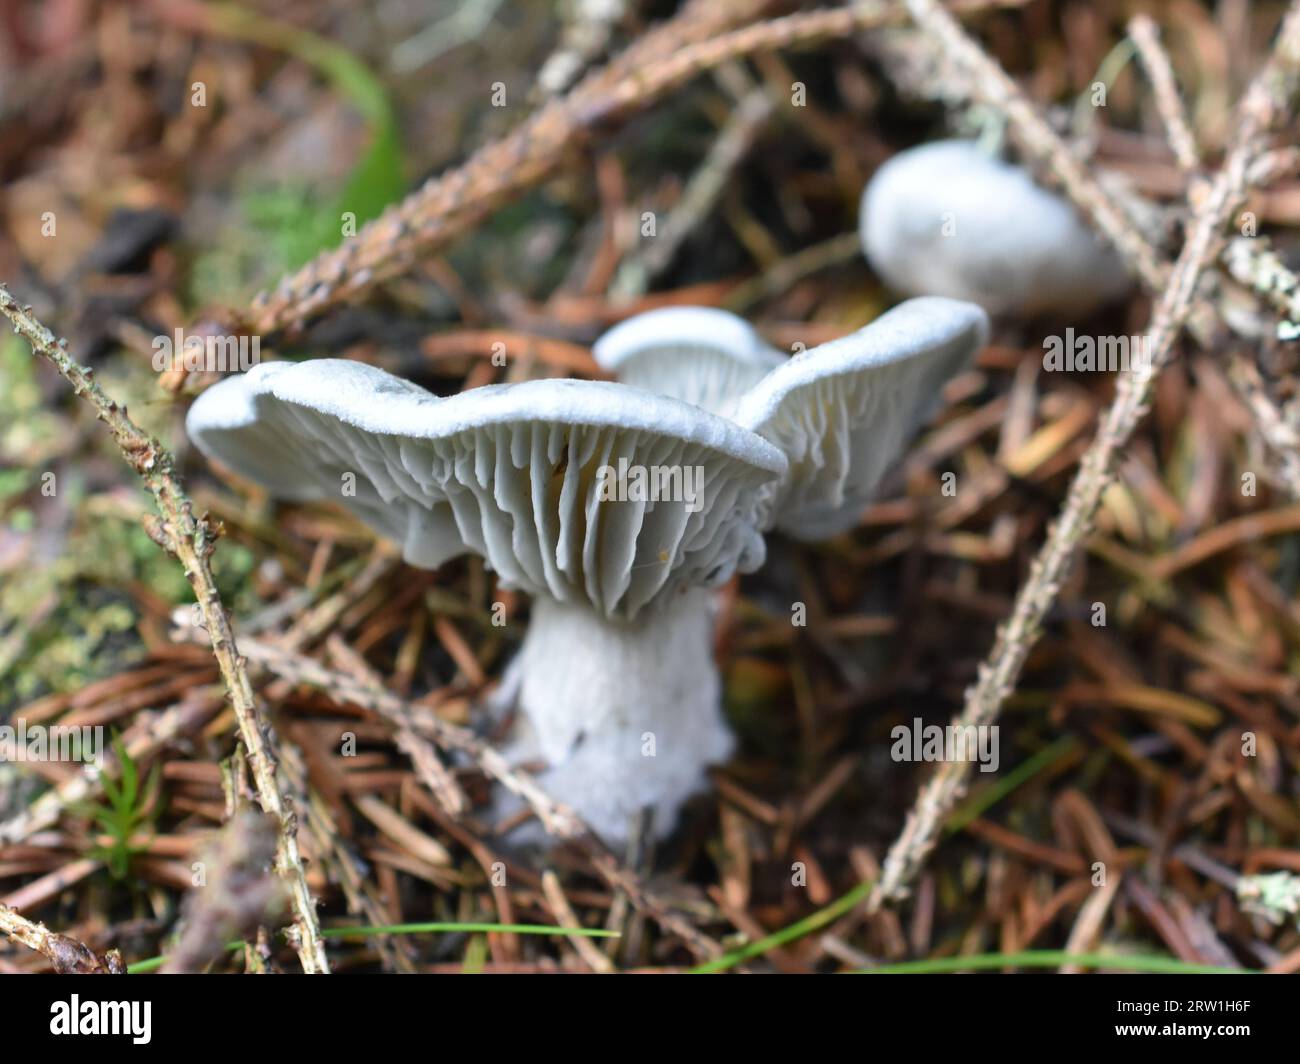 Aniseed toadstool Clitocybe odora in nature Stock Photo